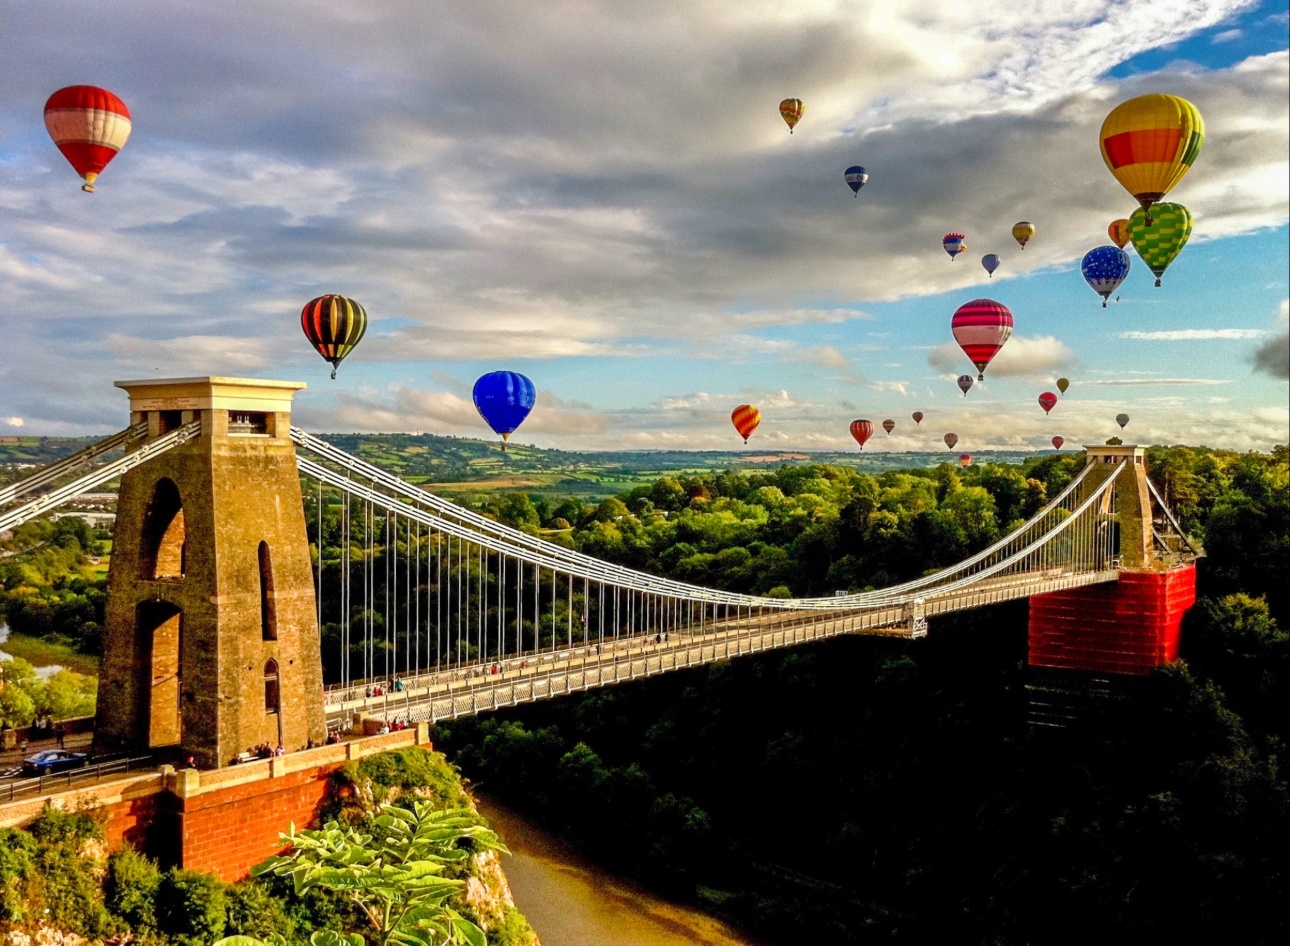 clifton bridge with hot air balloons flying over